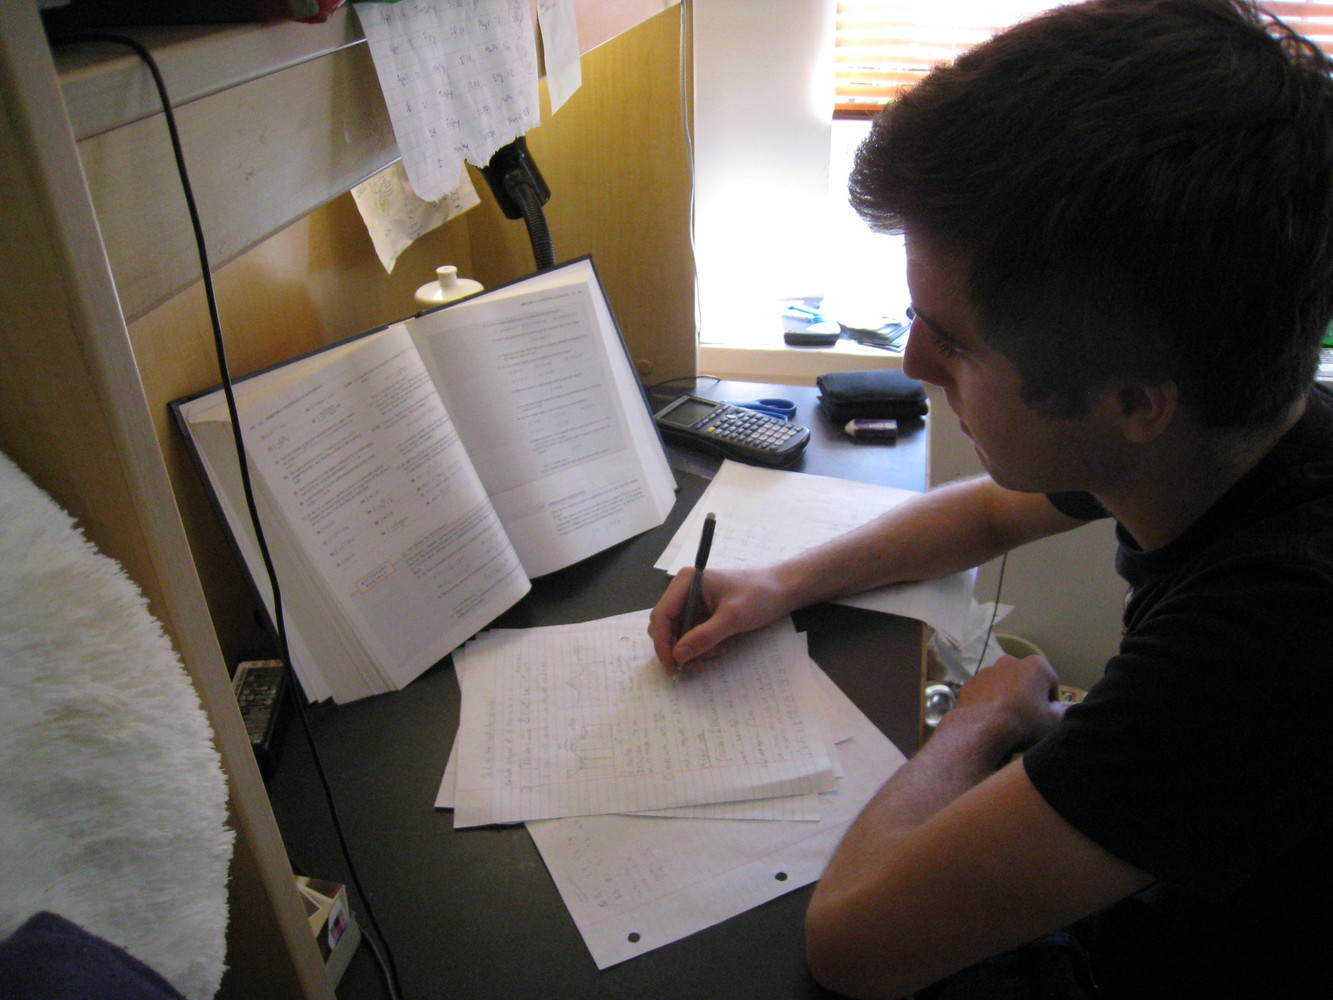 A Student of the University of British Columbia studying for final exams